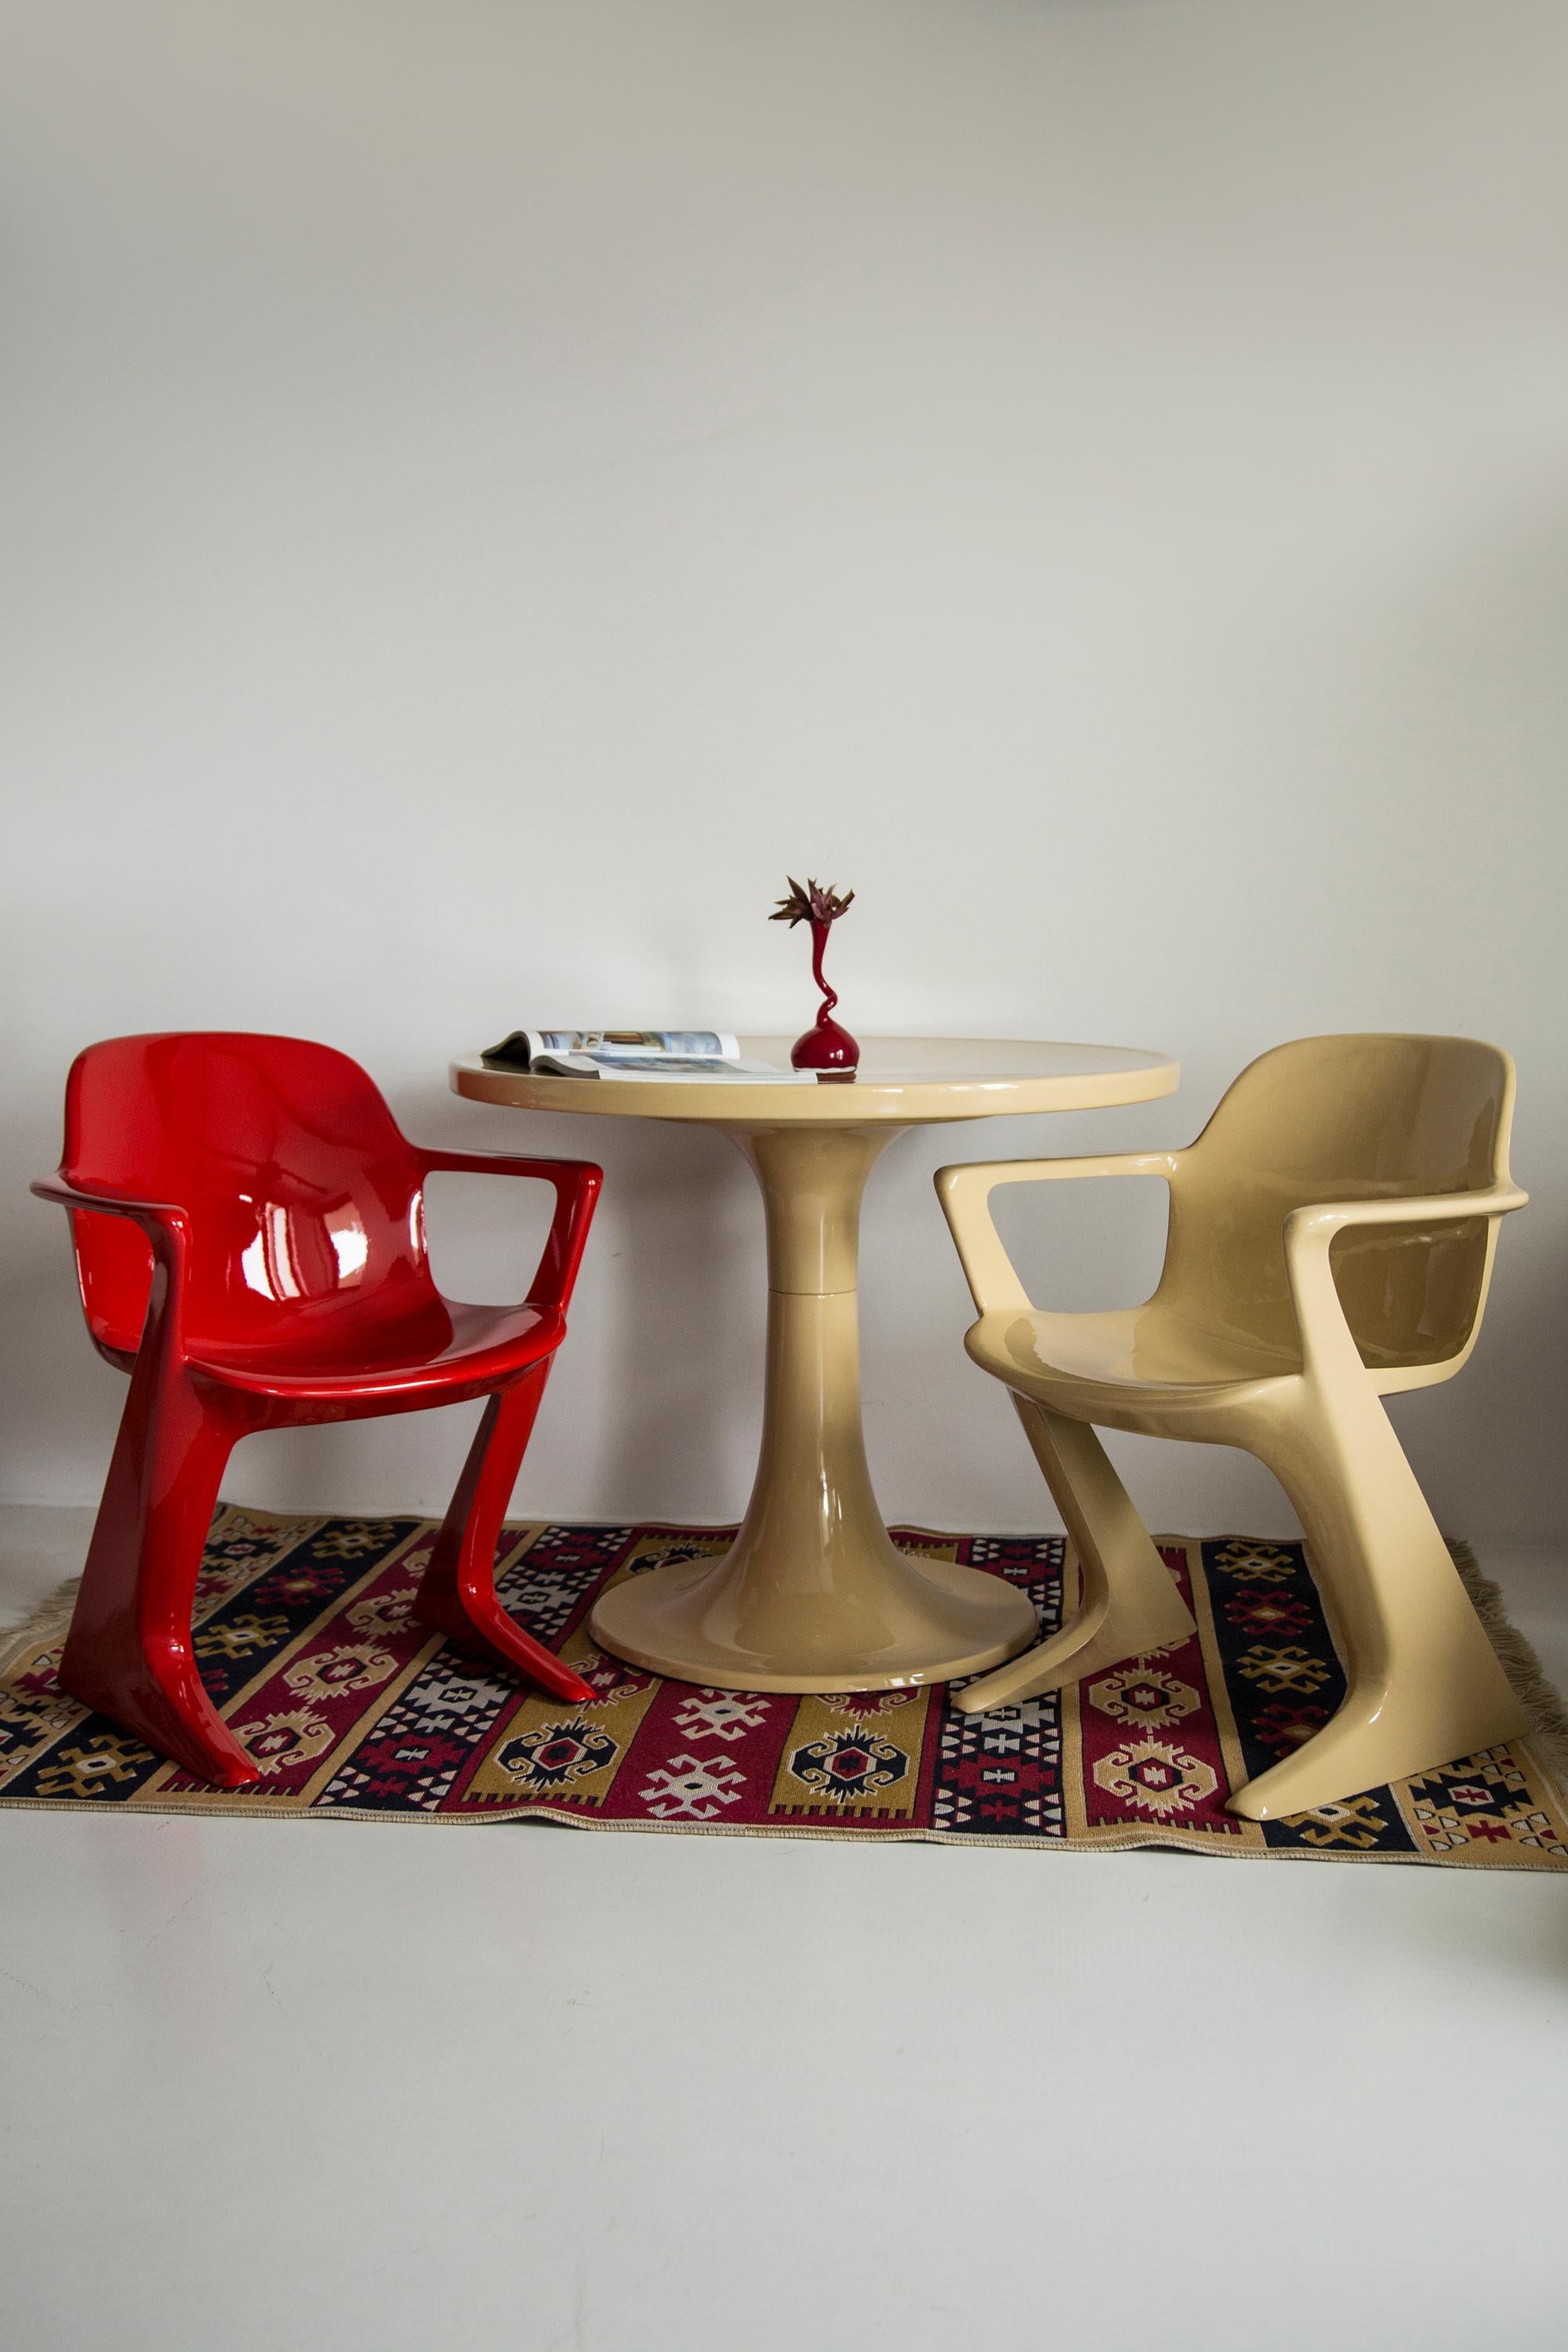 20th Century Midcentury Beige and Red Kangaroo Chairs and Table Ernst Moeckl, Germany, 1968 For Sale